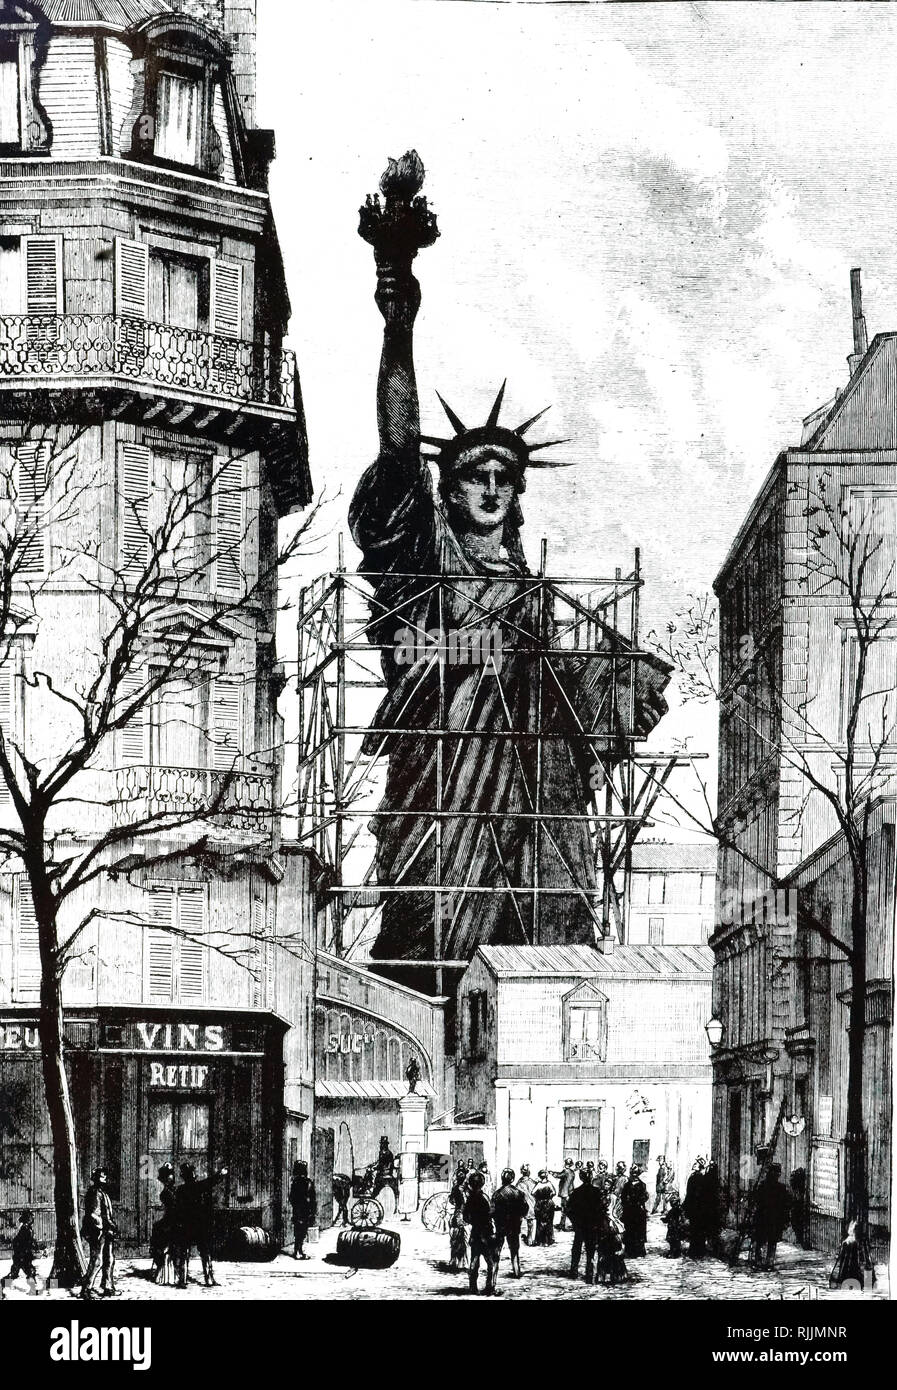 An engraving depicting the construction of the Statue Of Liberty France, designed by French sculptor Frederic Auguste Bartholdi and built by Gustave Eiffel. The statue was dedicated to America on October 28, 1886. Dated 19th century Stock Photo